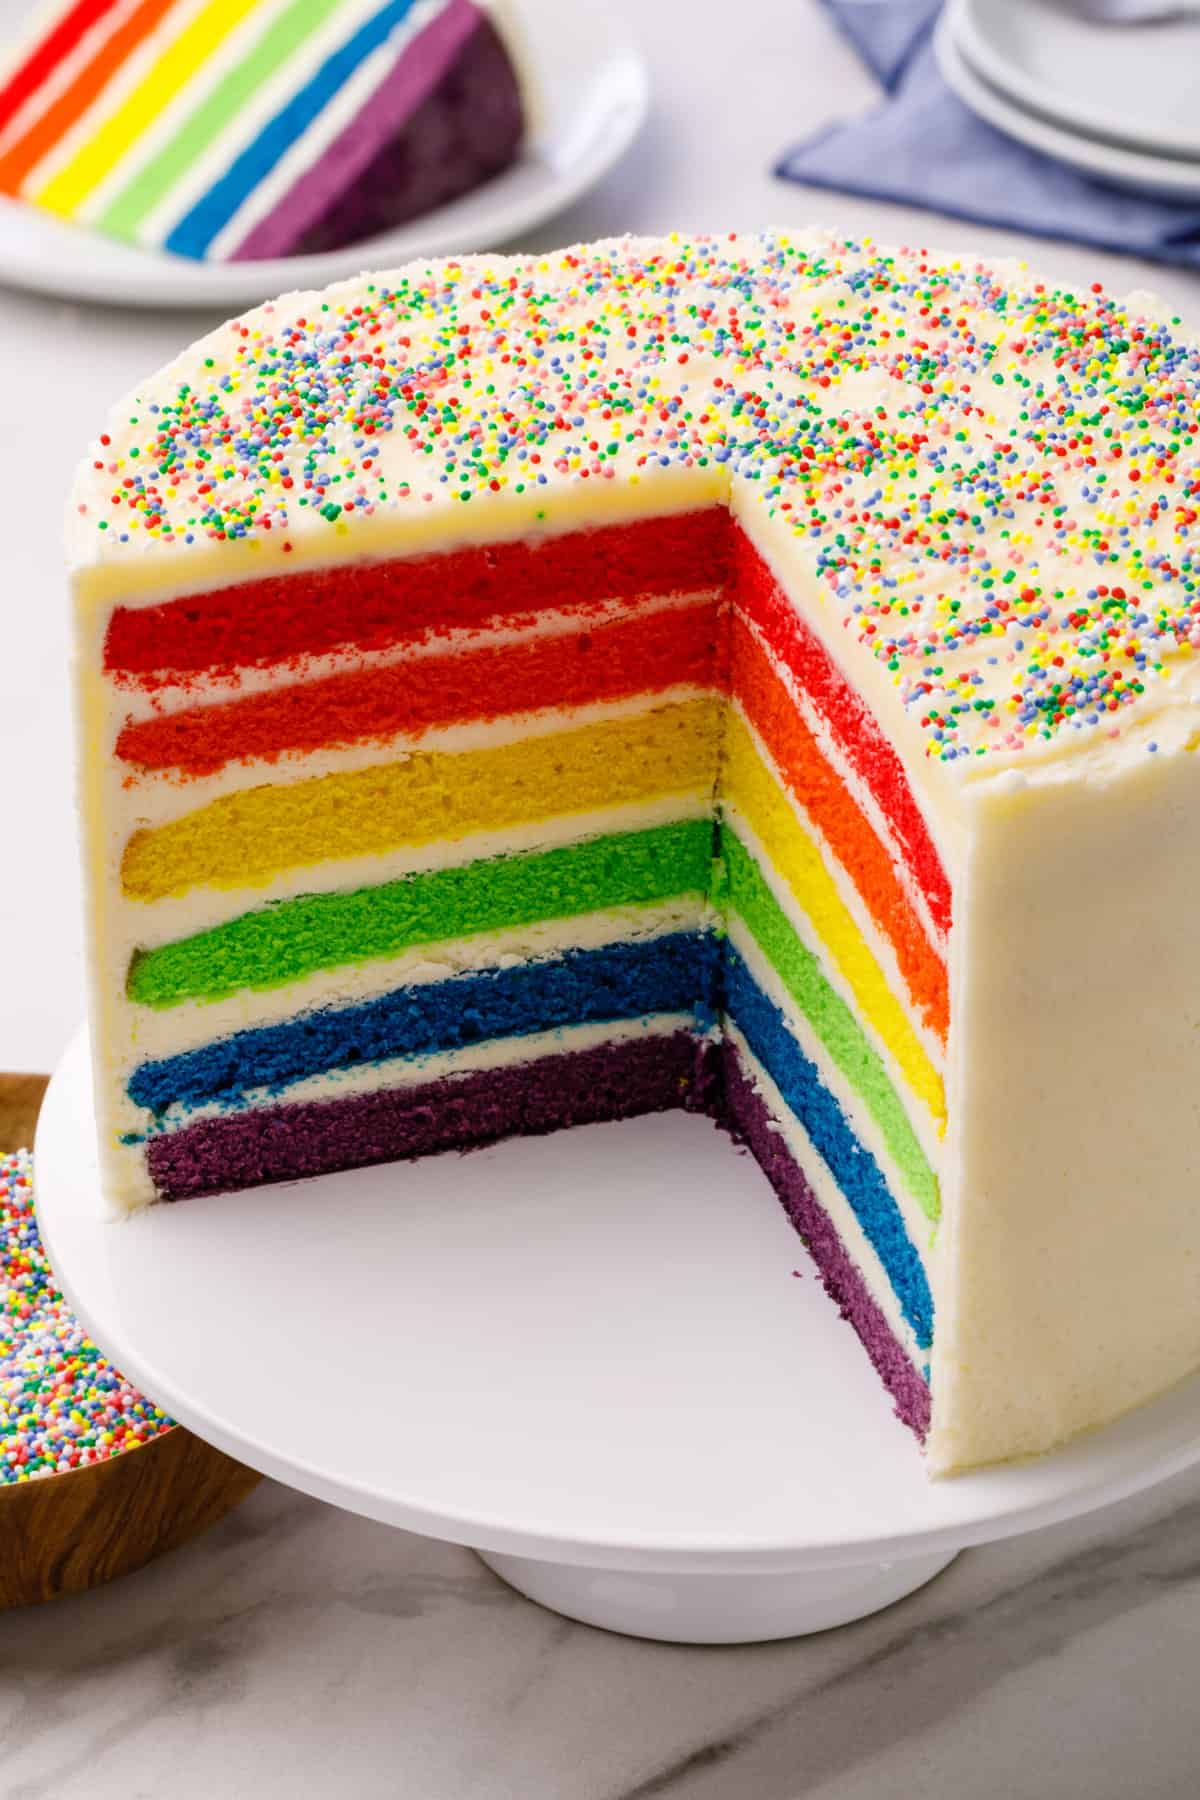 cross section showing rainbow layer cake served on a white cake stand